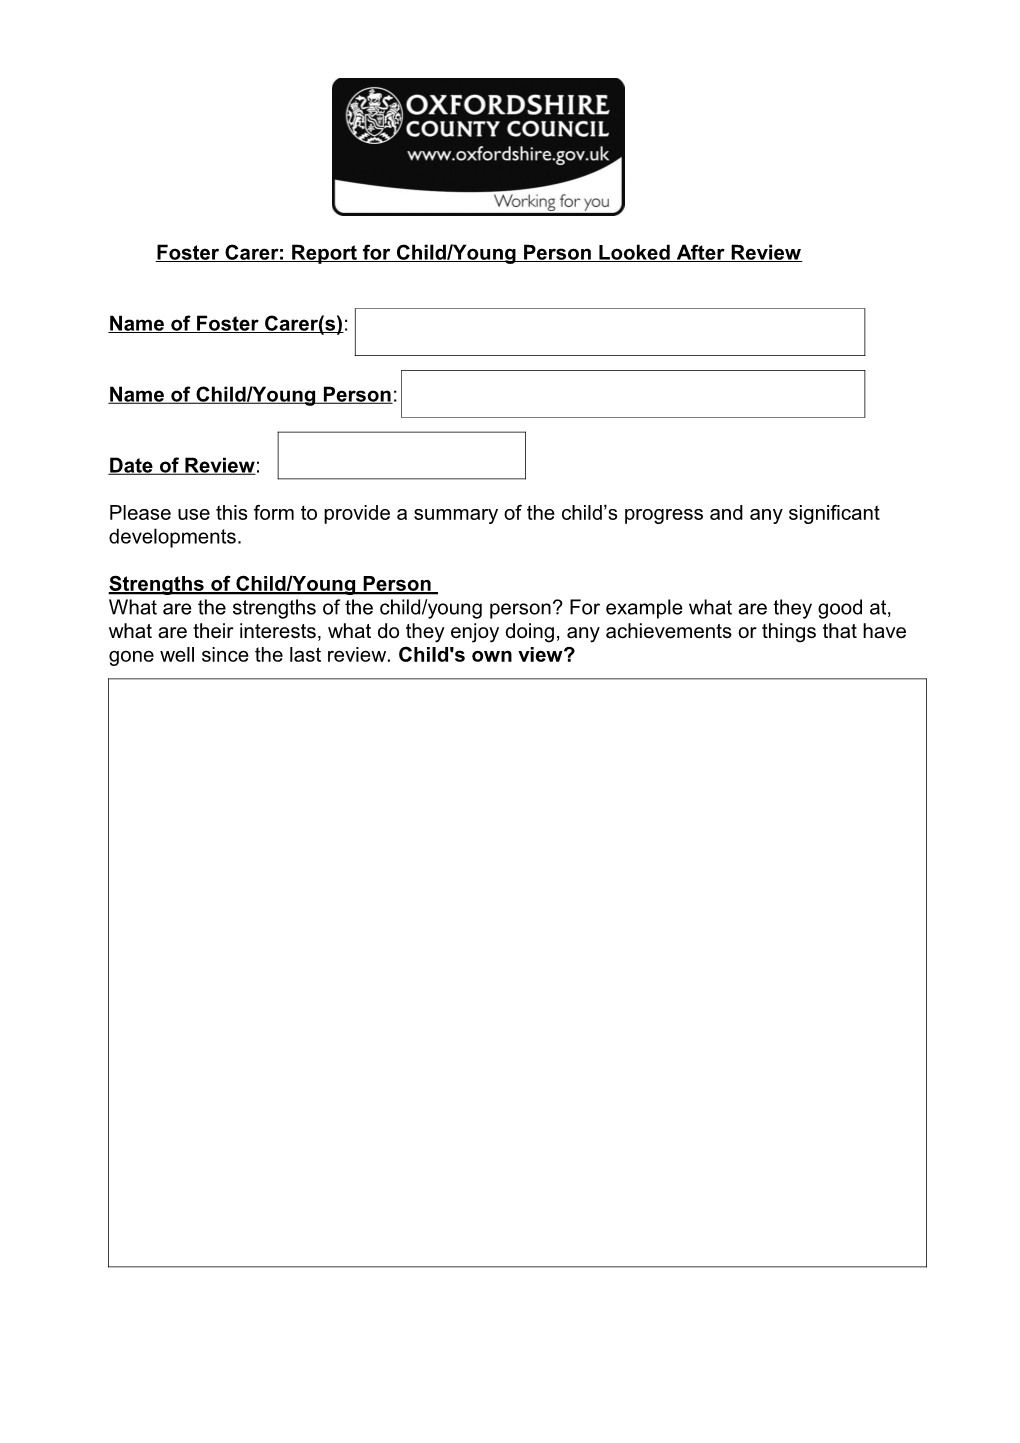 Foster Carer: Report for Child/Young Person Looked After Review